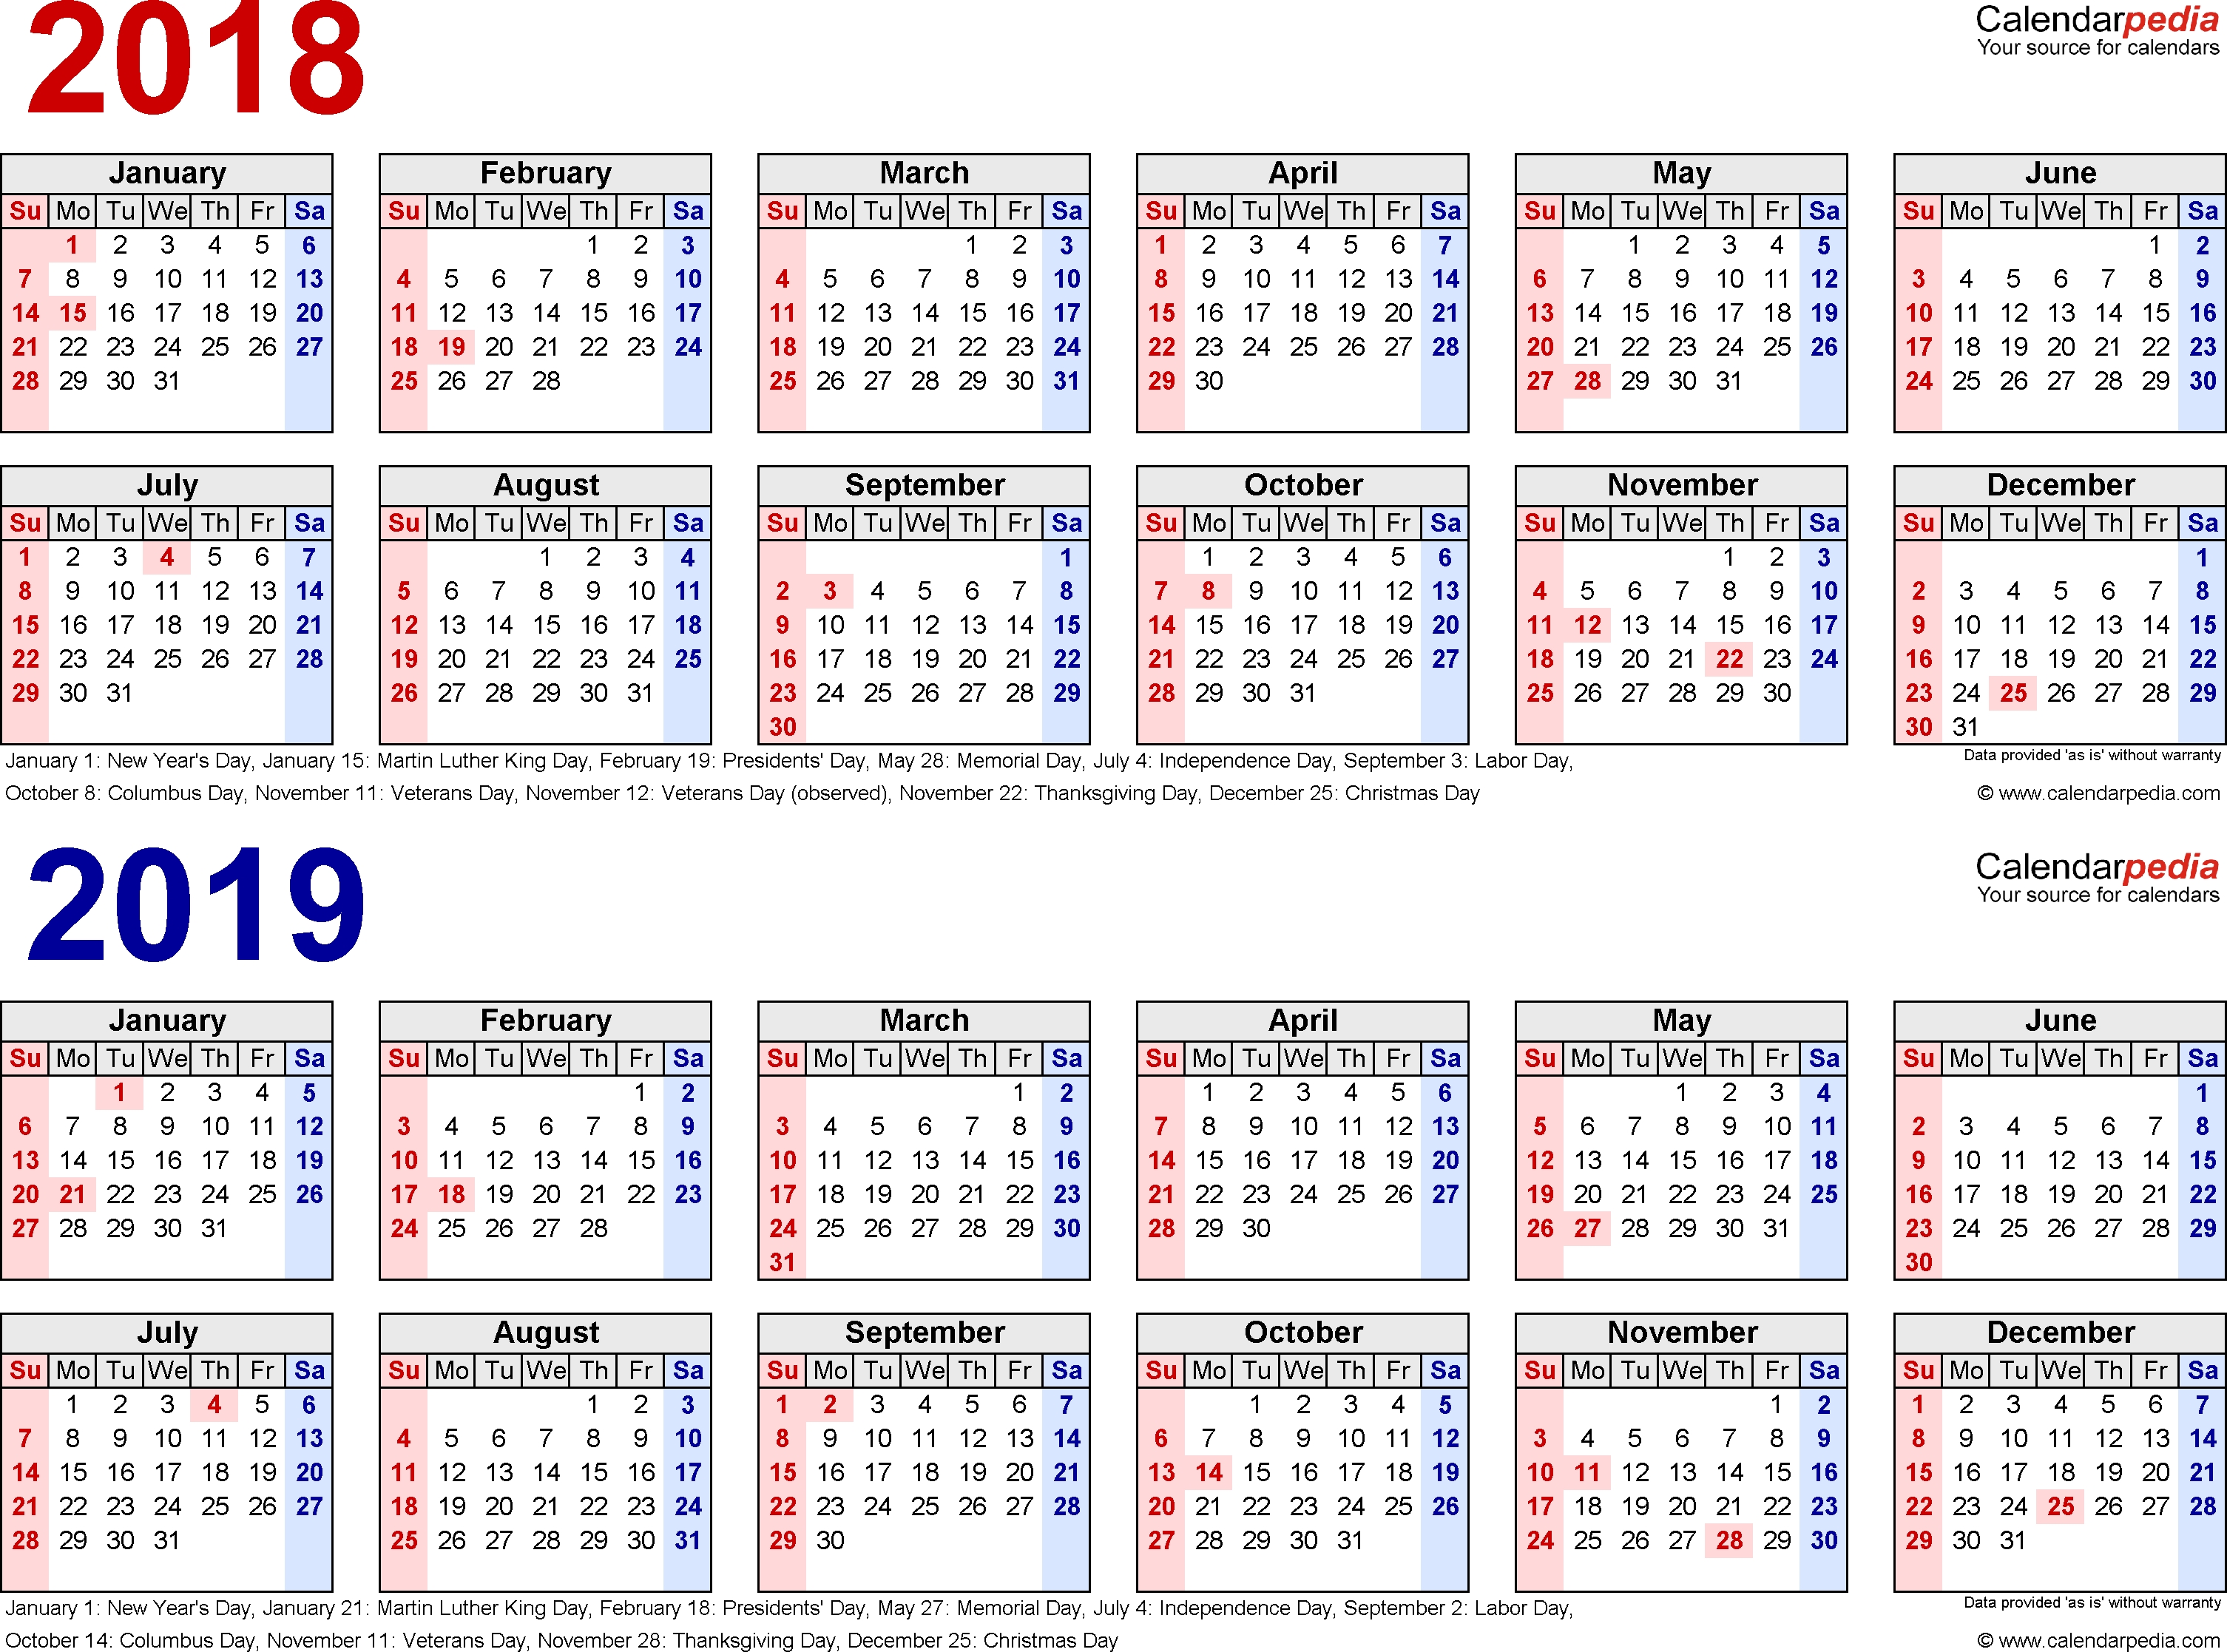 Image Result For Free Printable 2018 /2019 Calendar | August